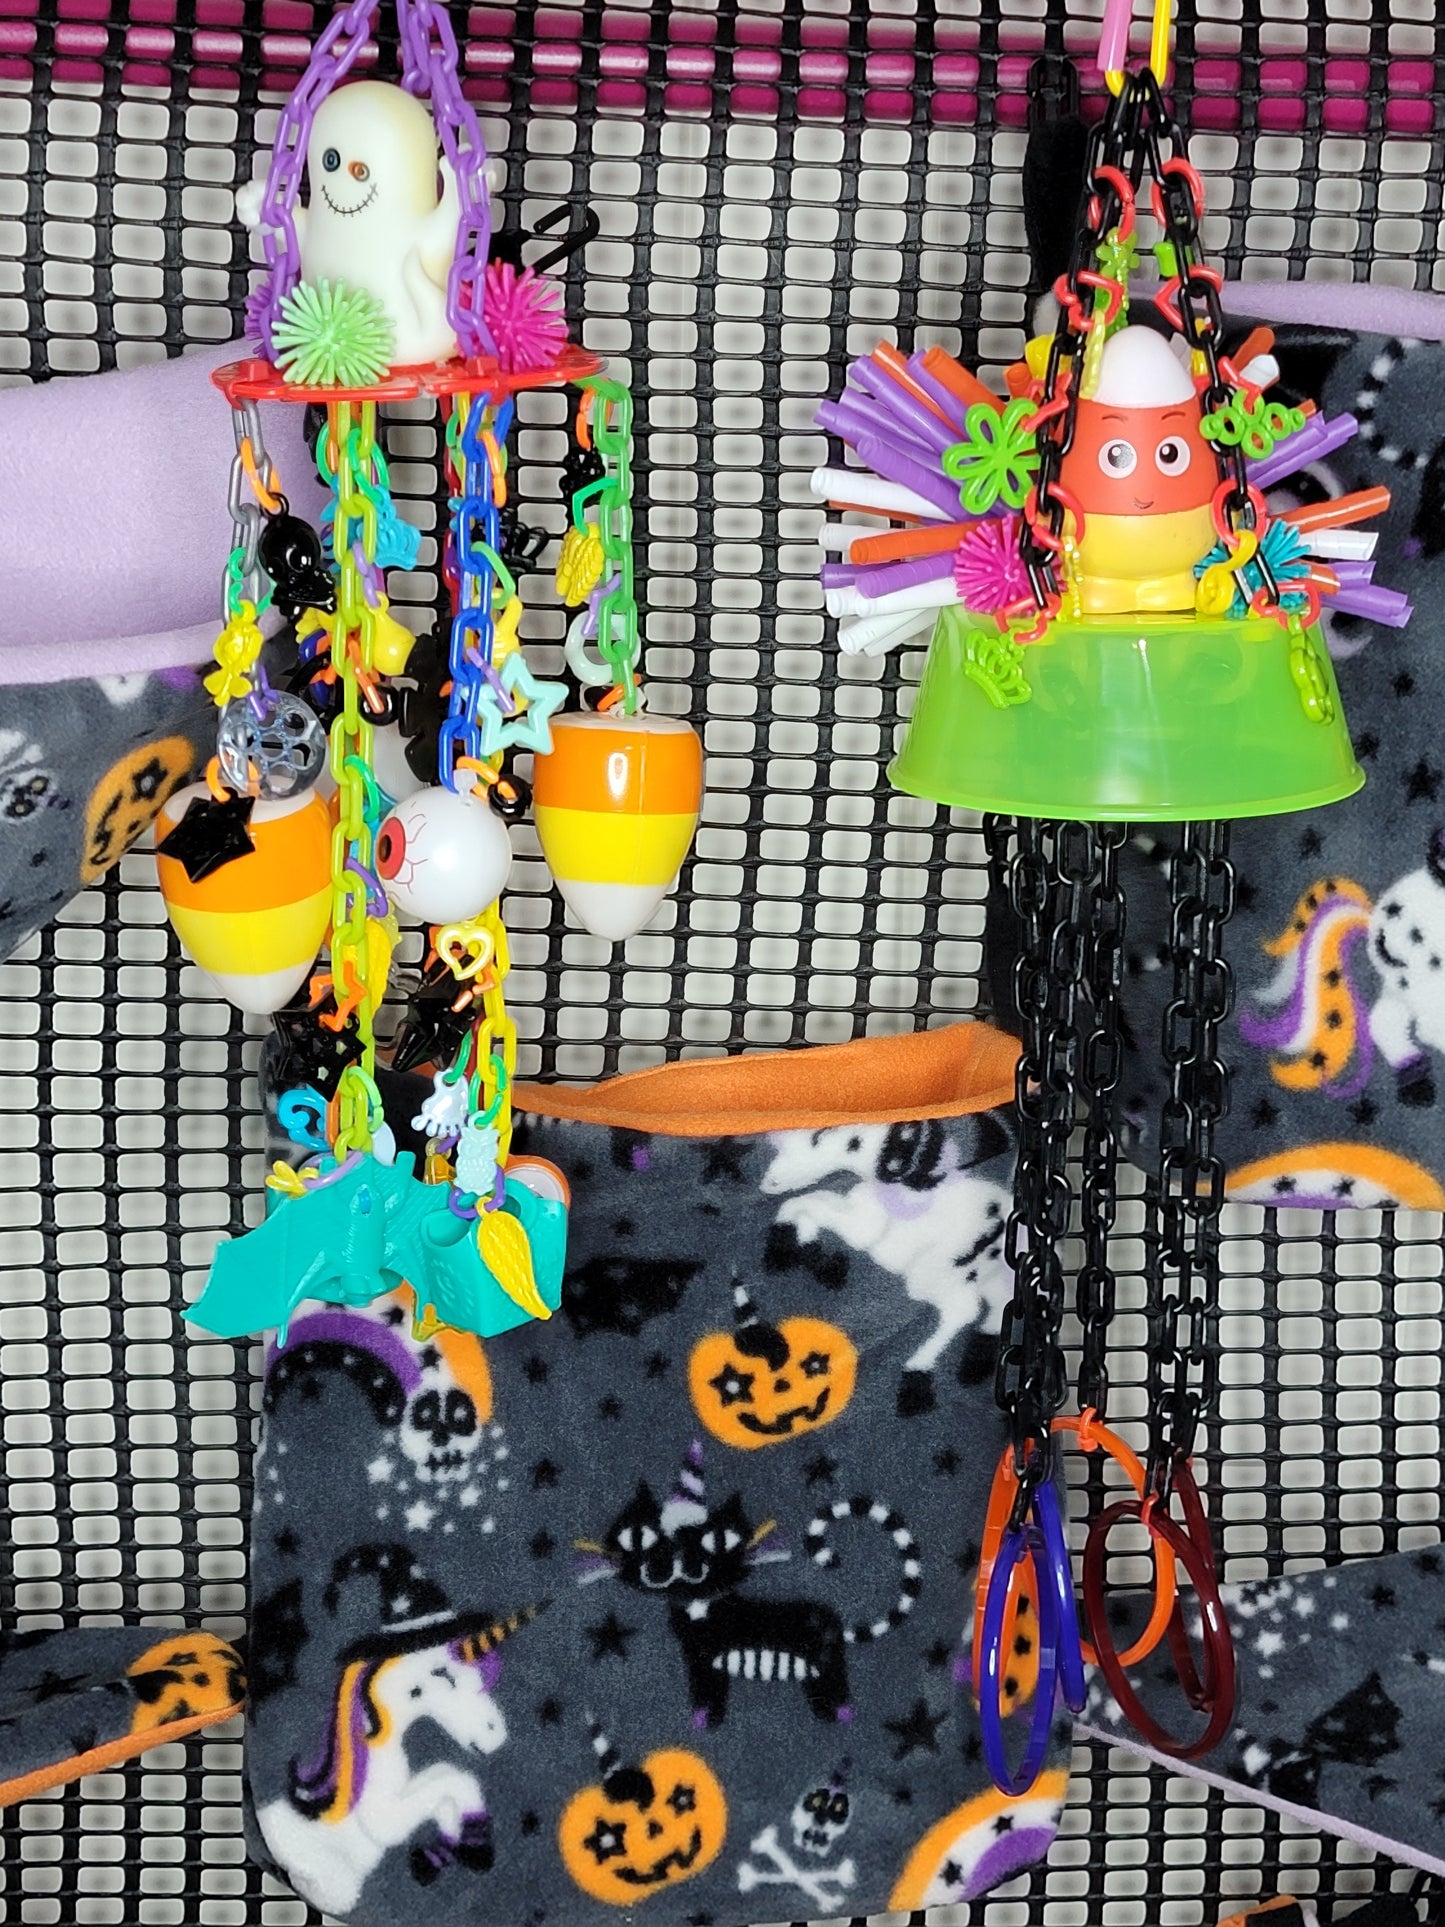 Halloween cage set with toys - Candy Corn and ghost